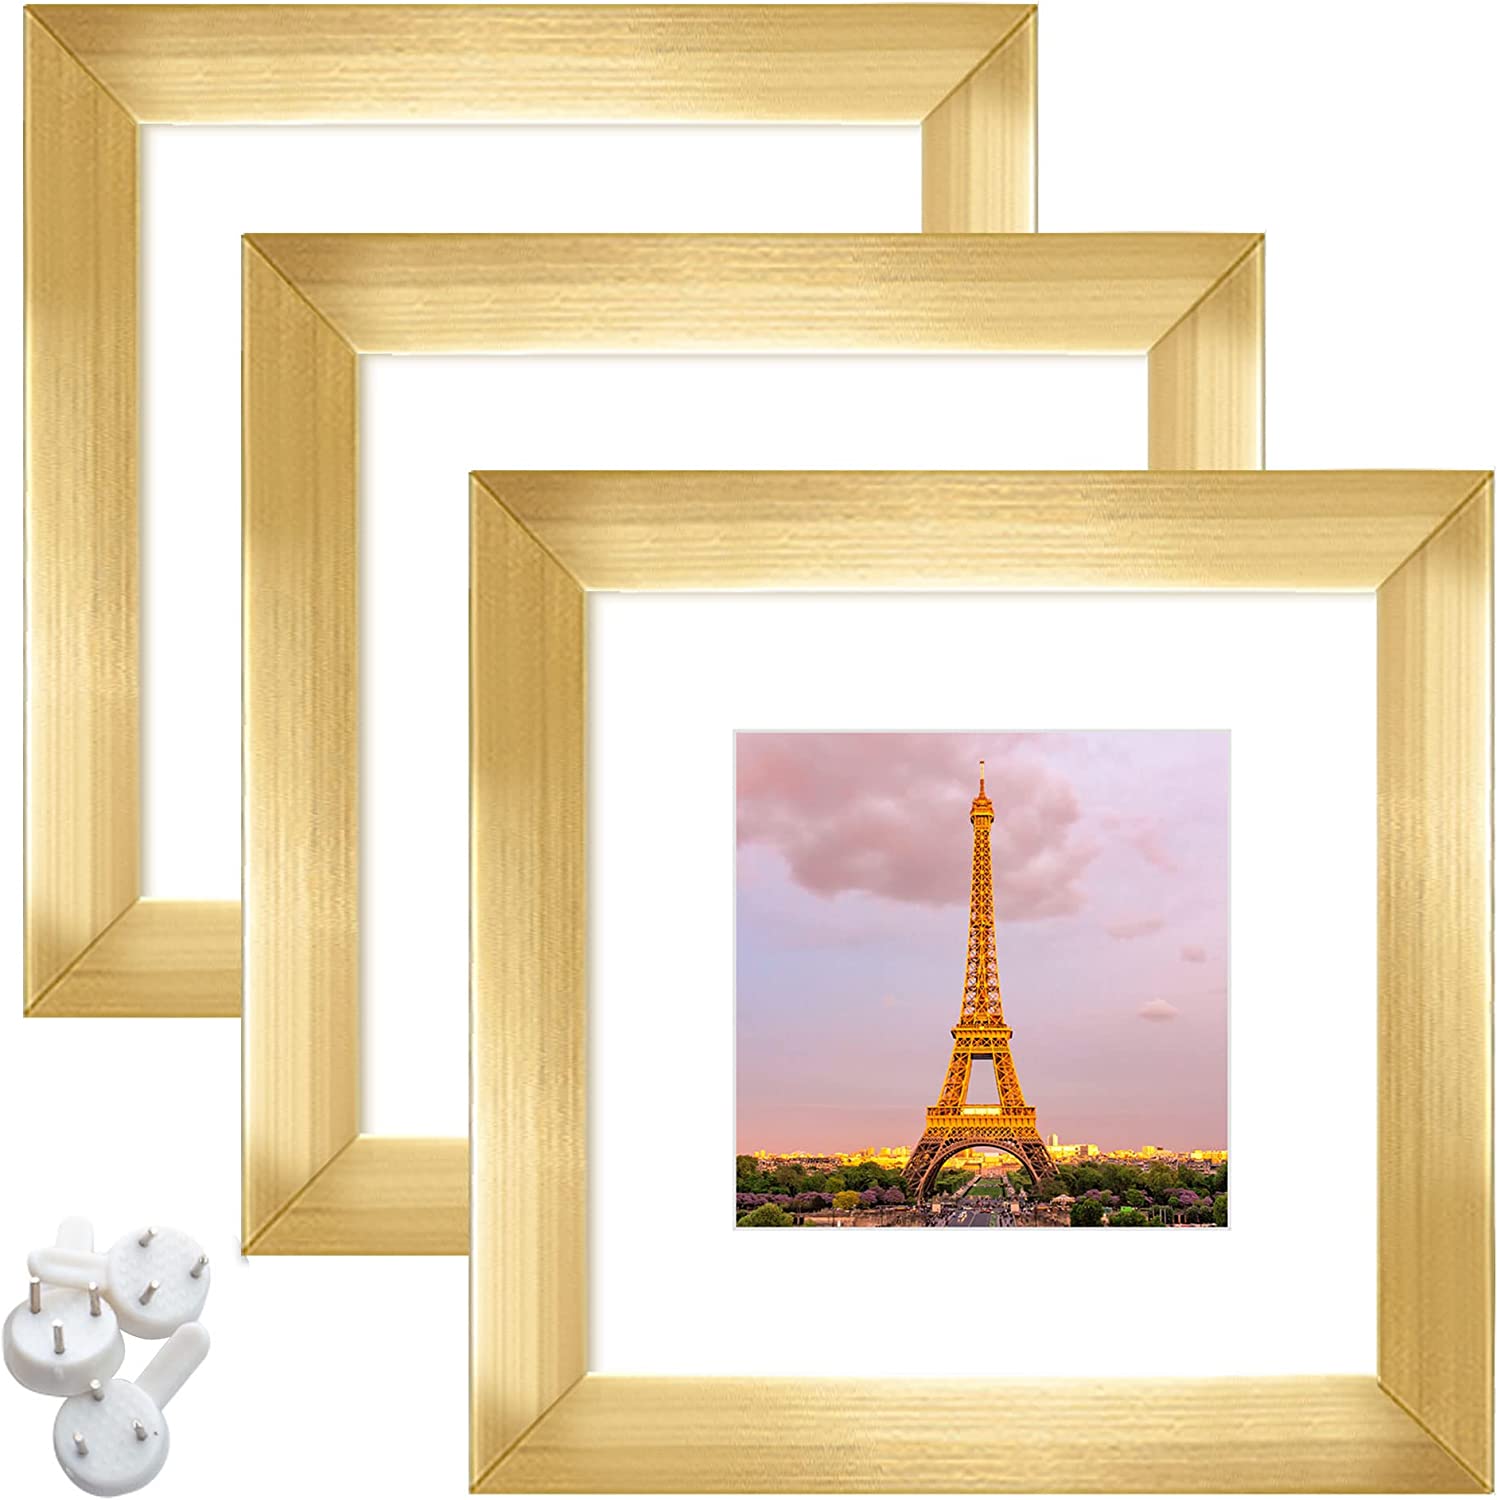 upsimples 6x6 Picture Frame Set of 3, Display Pictures 4x4 with Mat or 6x6  Without Mat, Multi Photo Frames Collage for Wall, Gold